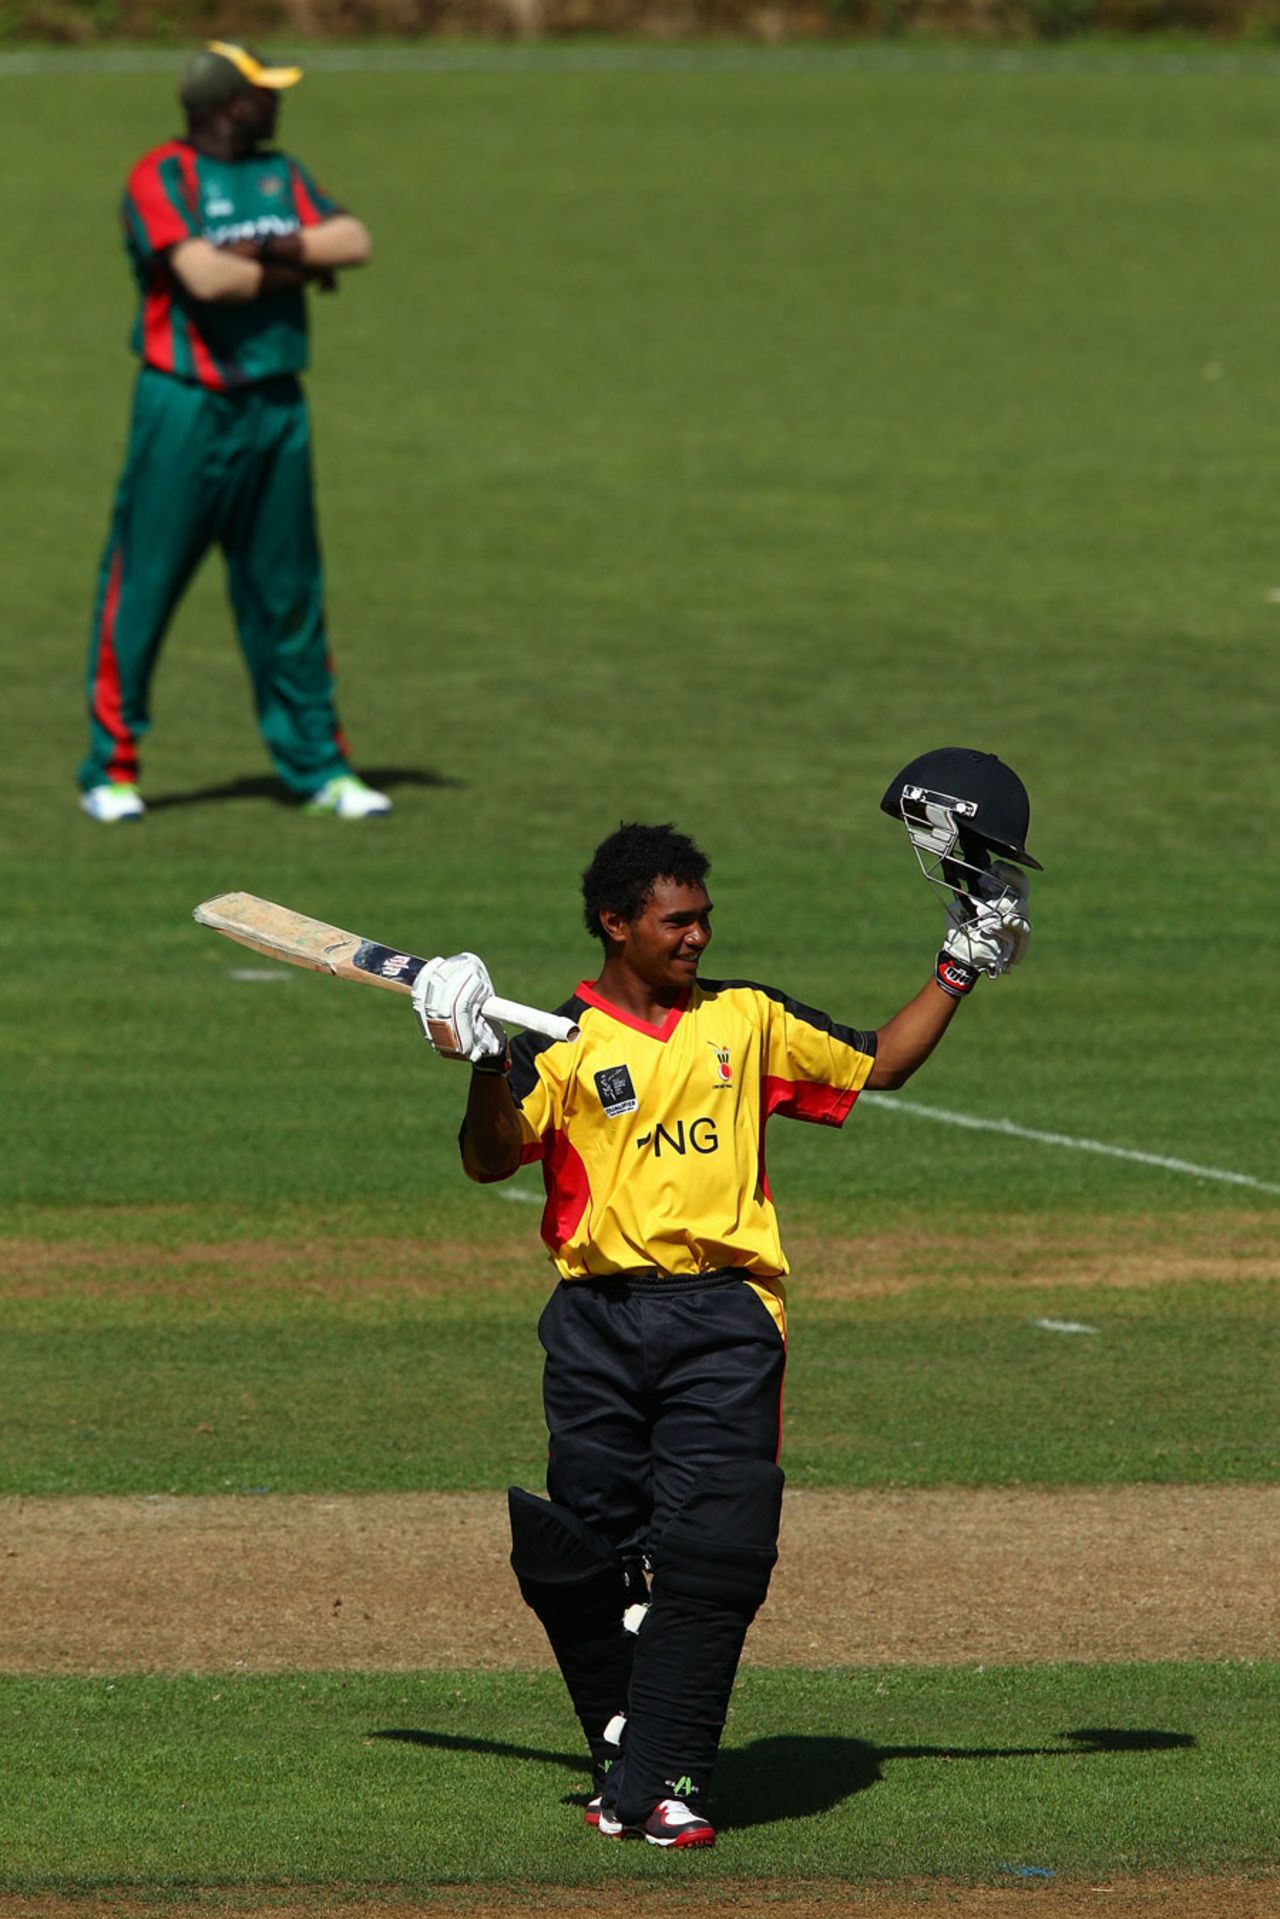 Lega Siaka acknowledges the crowd after reaching a maiden century, Kenya v Papua New Guinea, World Cup 2015 qualifiers, New Plymouth, January 13, 2014